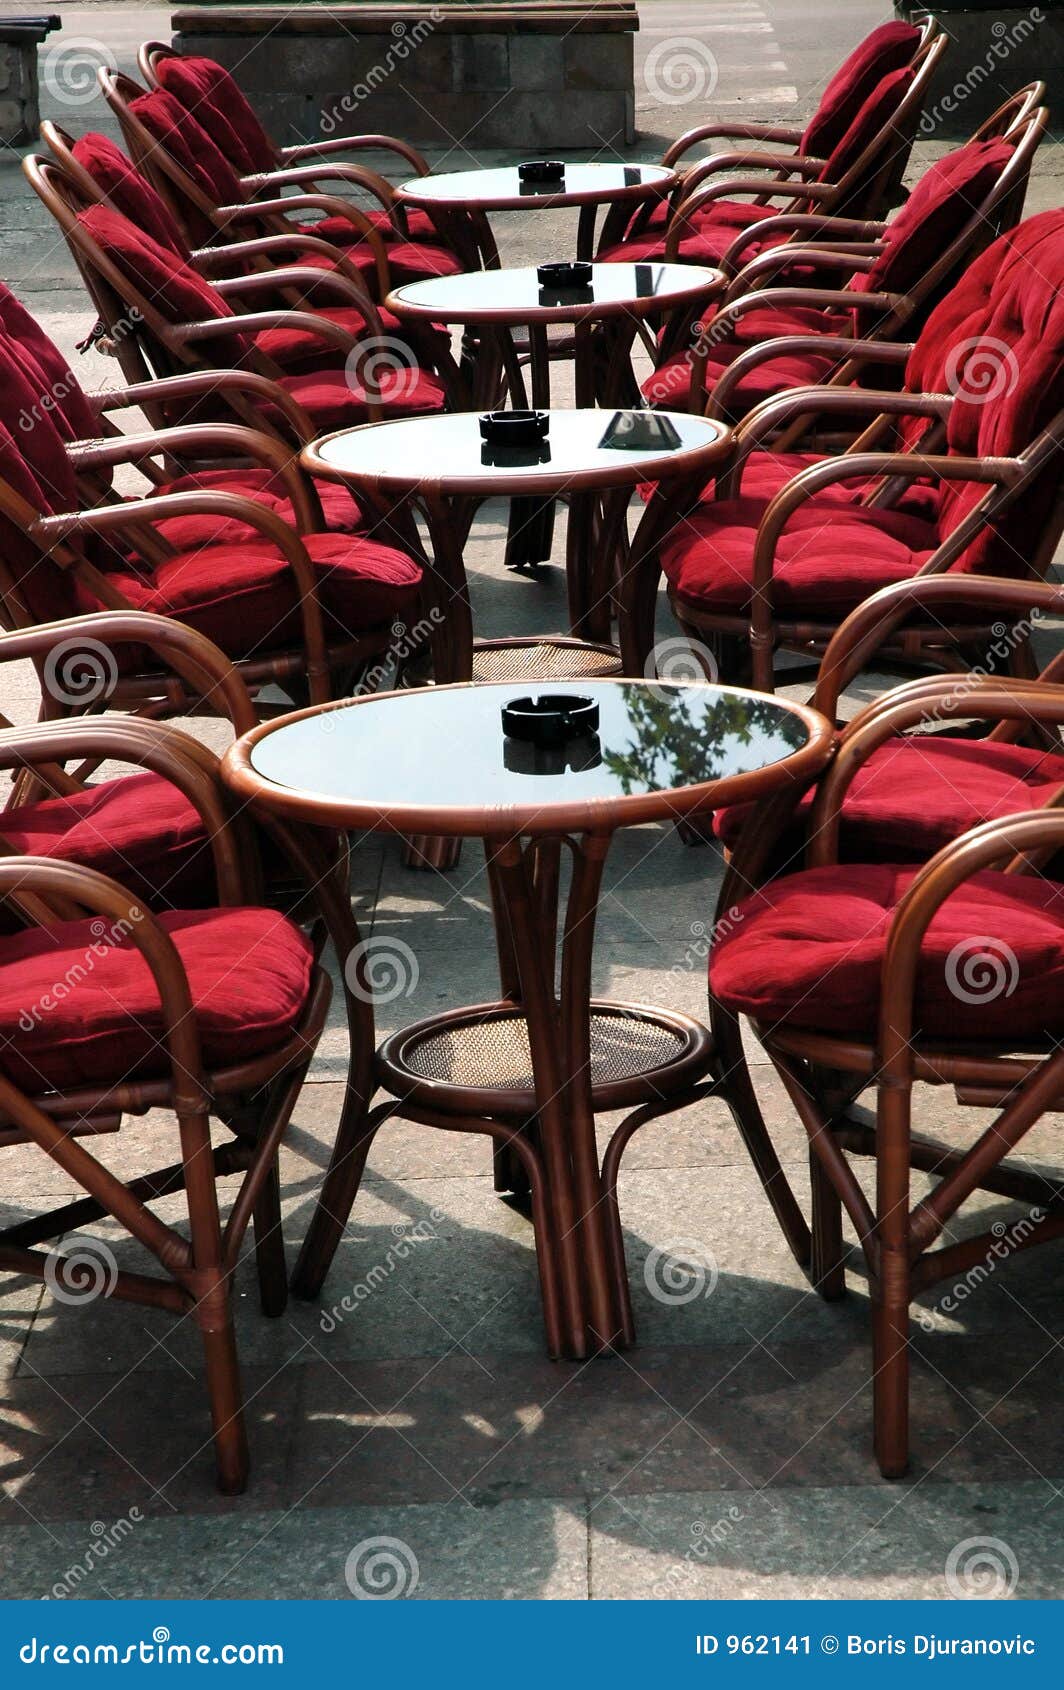 seats in caffe